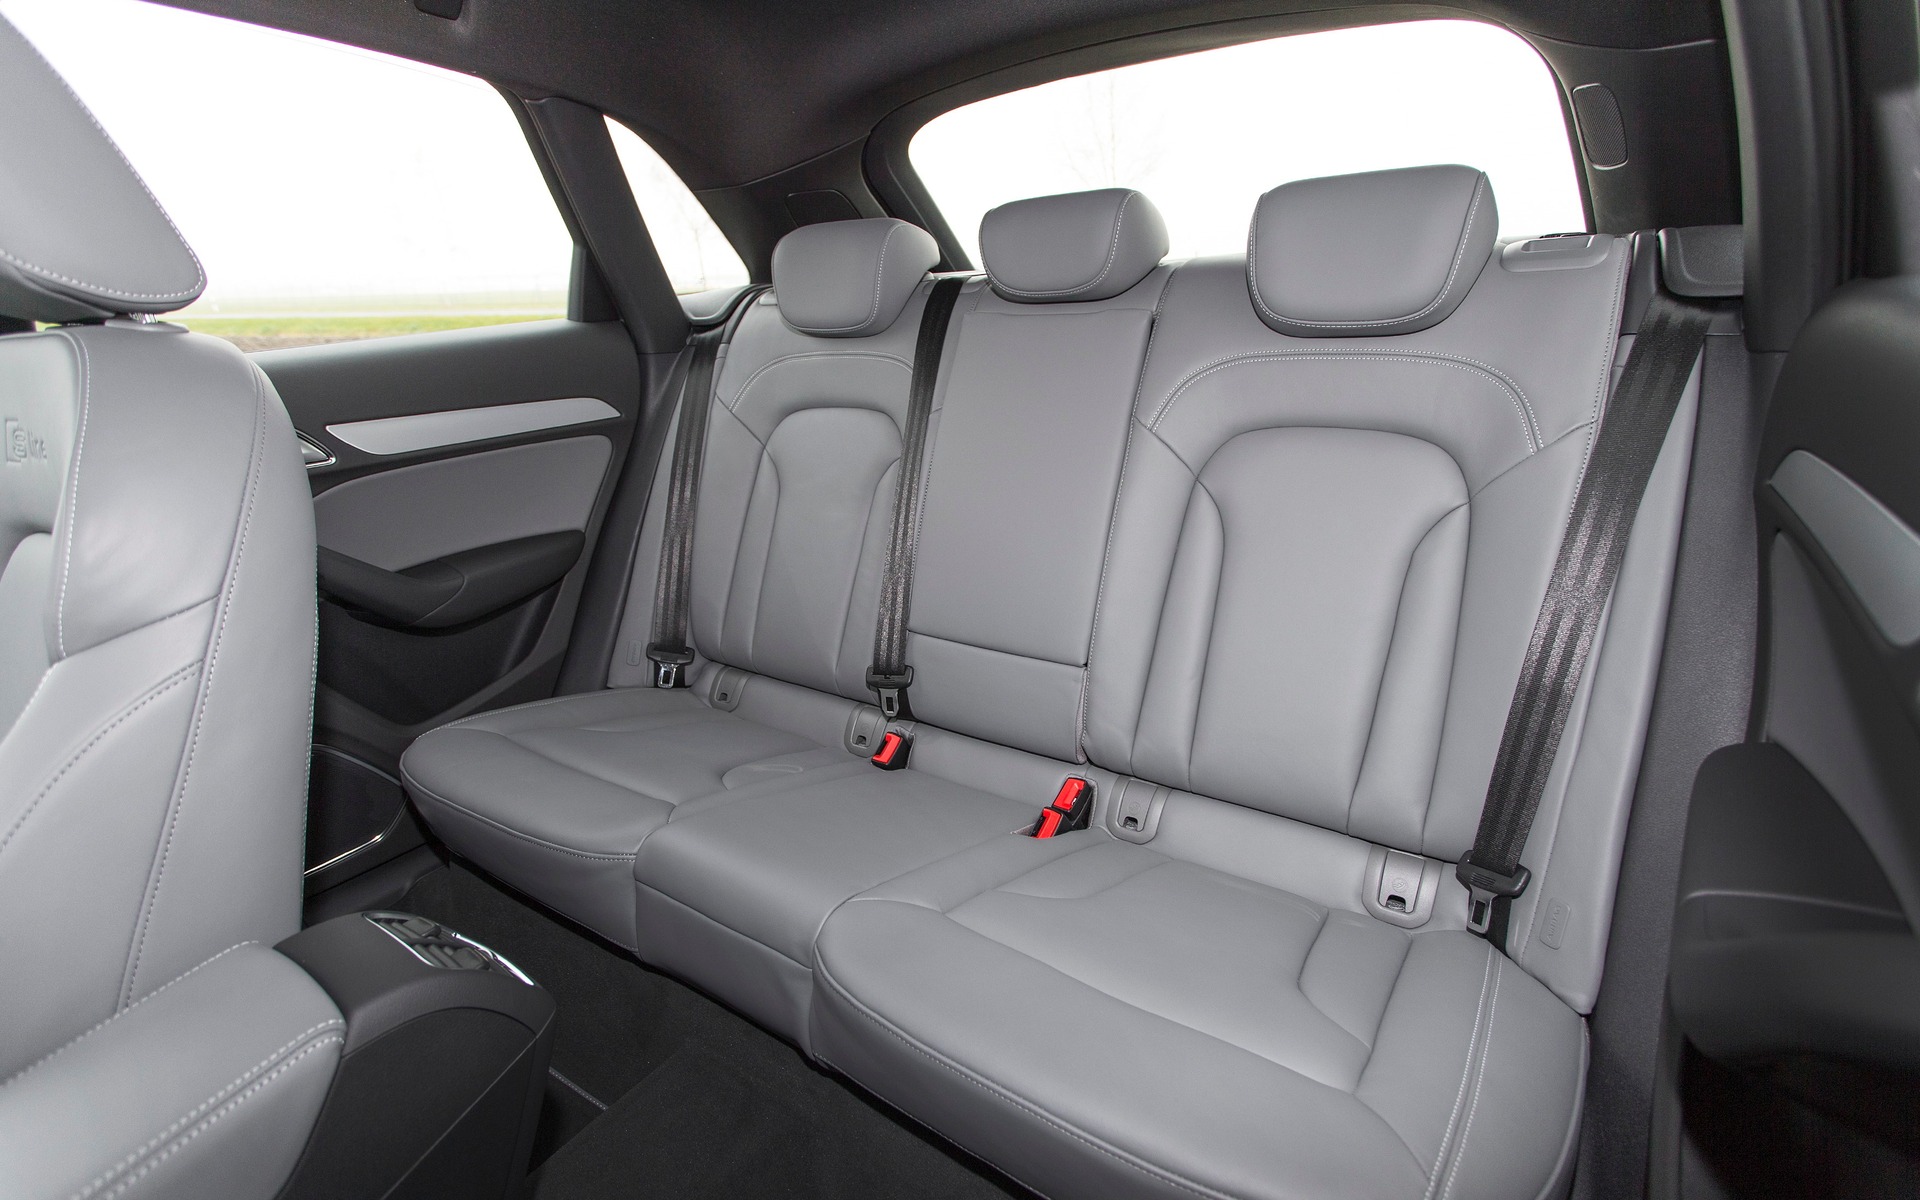 Compared to the Q5, this vehicle offers less legroom for rear passengers.